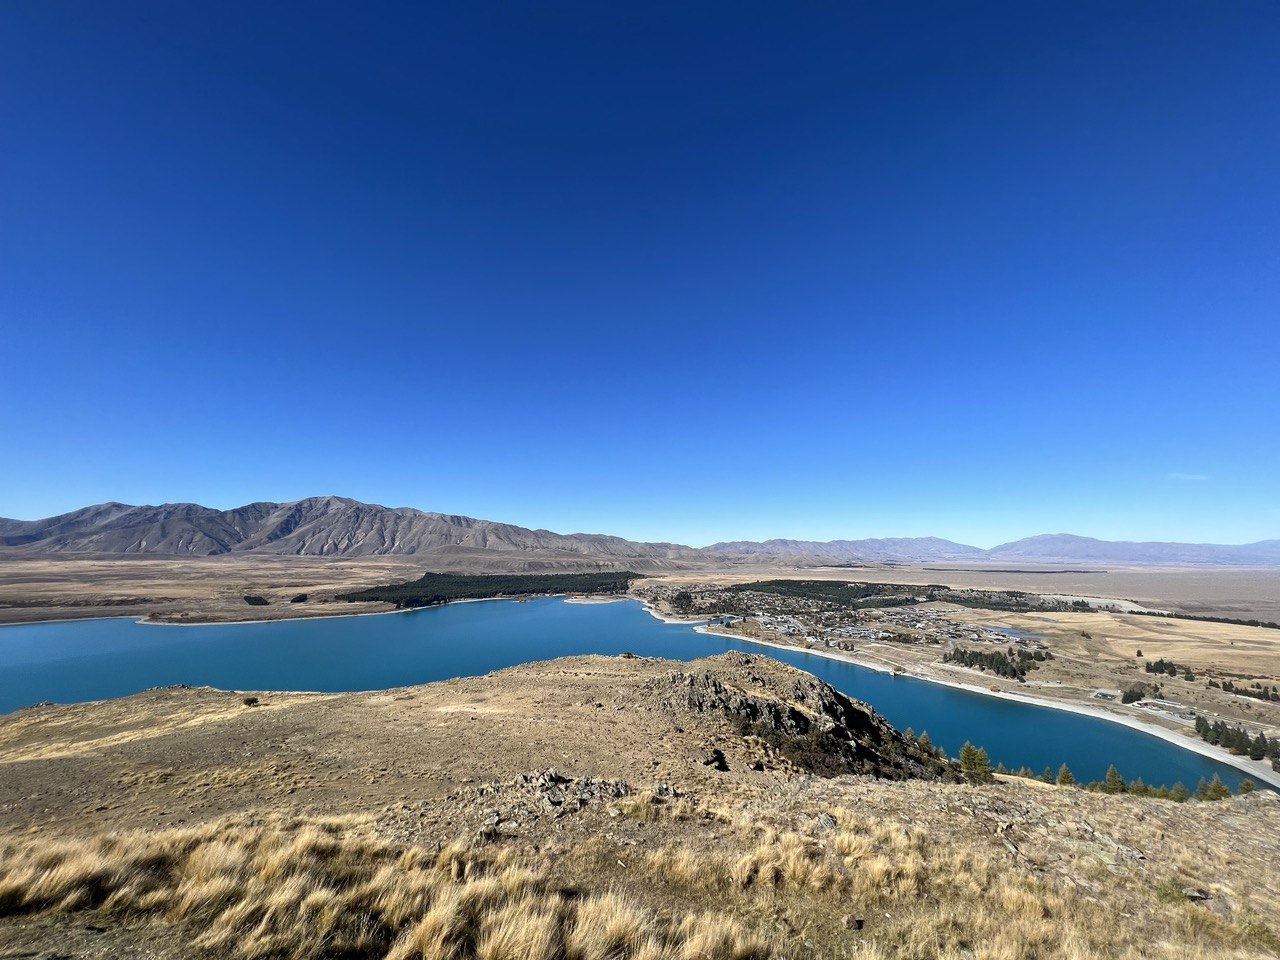 View of part of Lake Tekapo and the nearby town